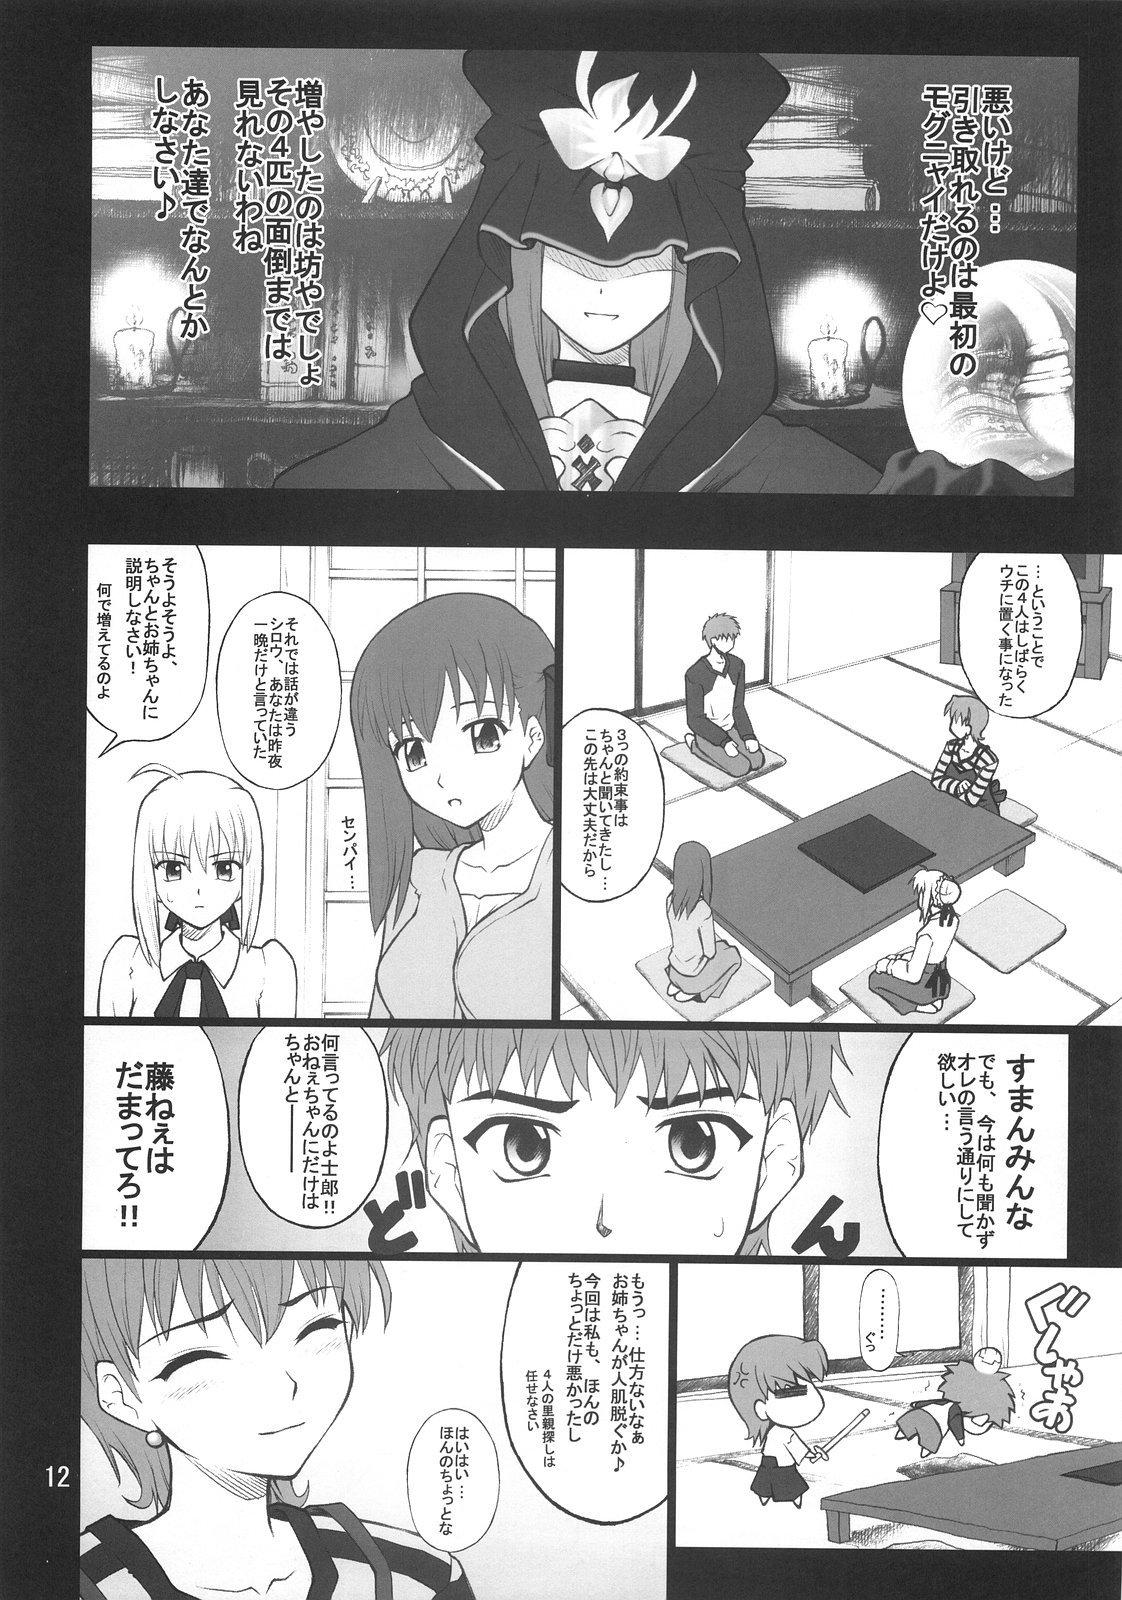 Argentina Grem-Rin 2 - Fate stay night Fate hollow ataraxia Adult - Page 11